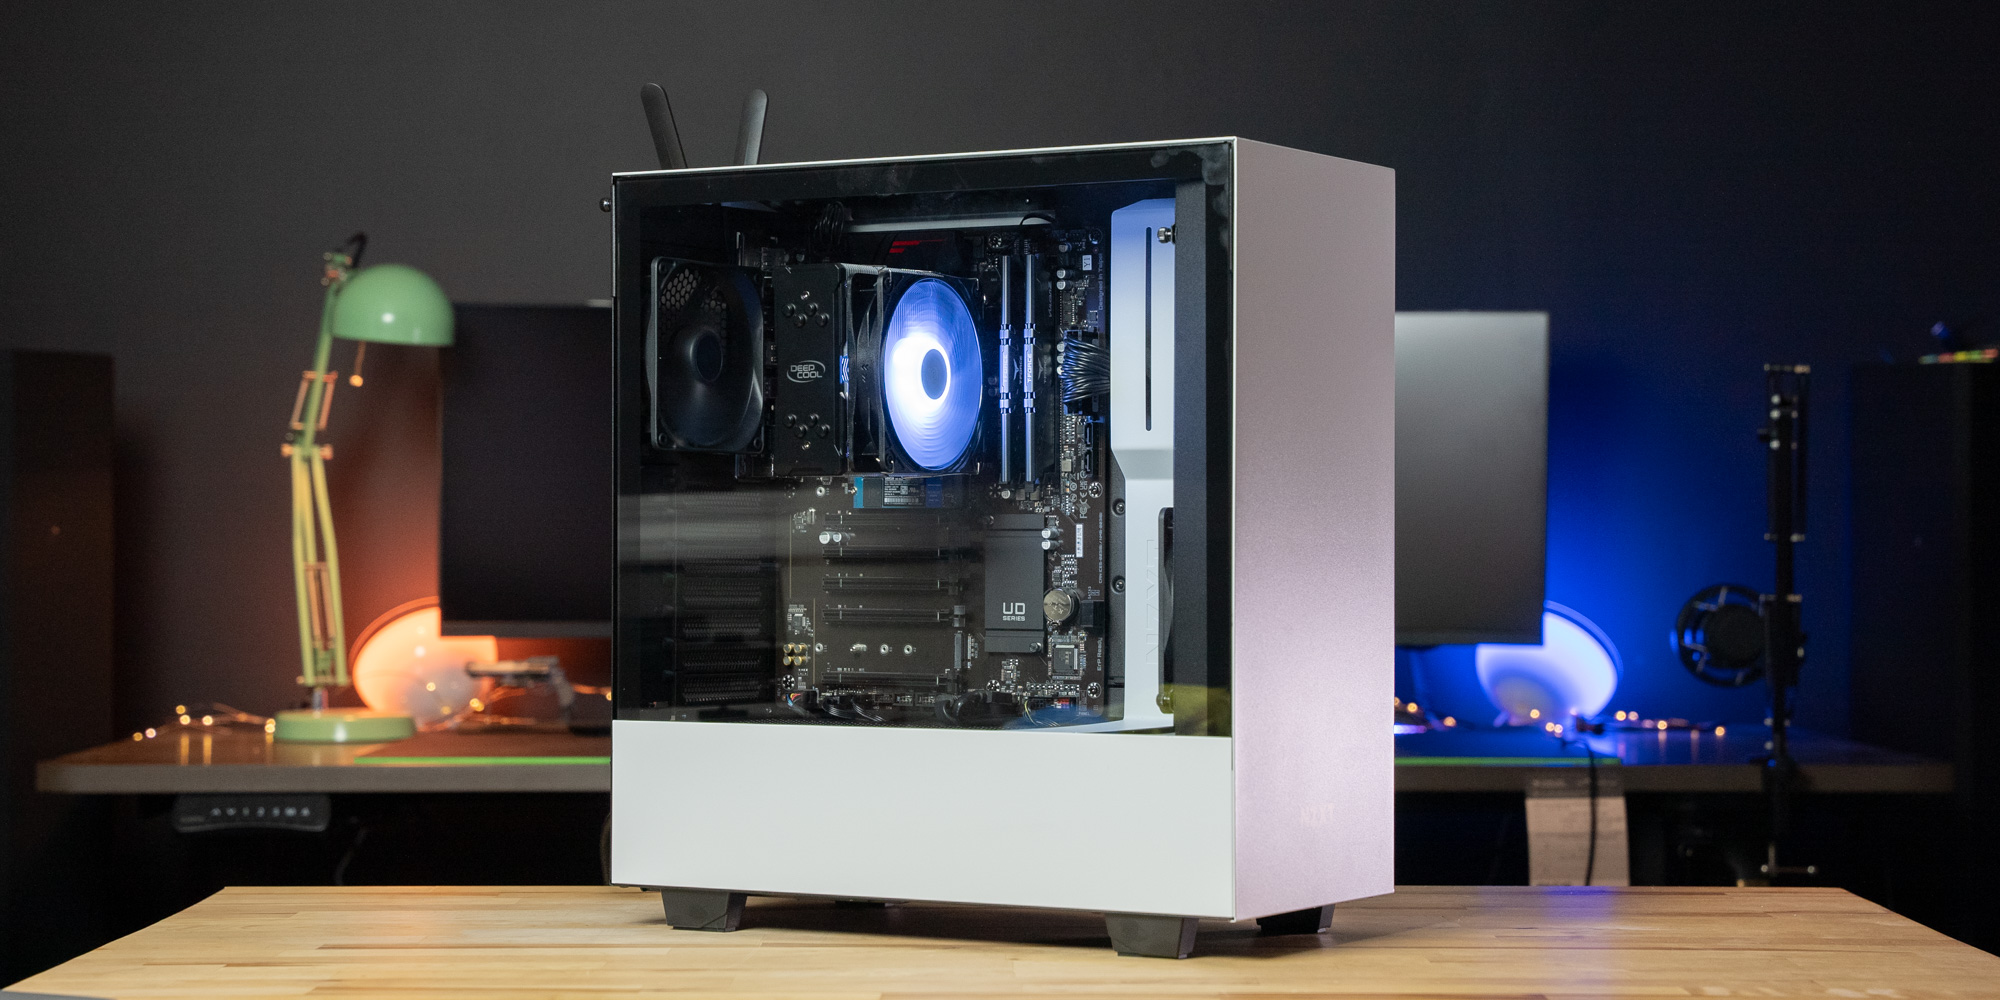 NZXT Foundation Review: Stop searching for GPU and start gaming